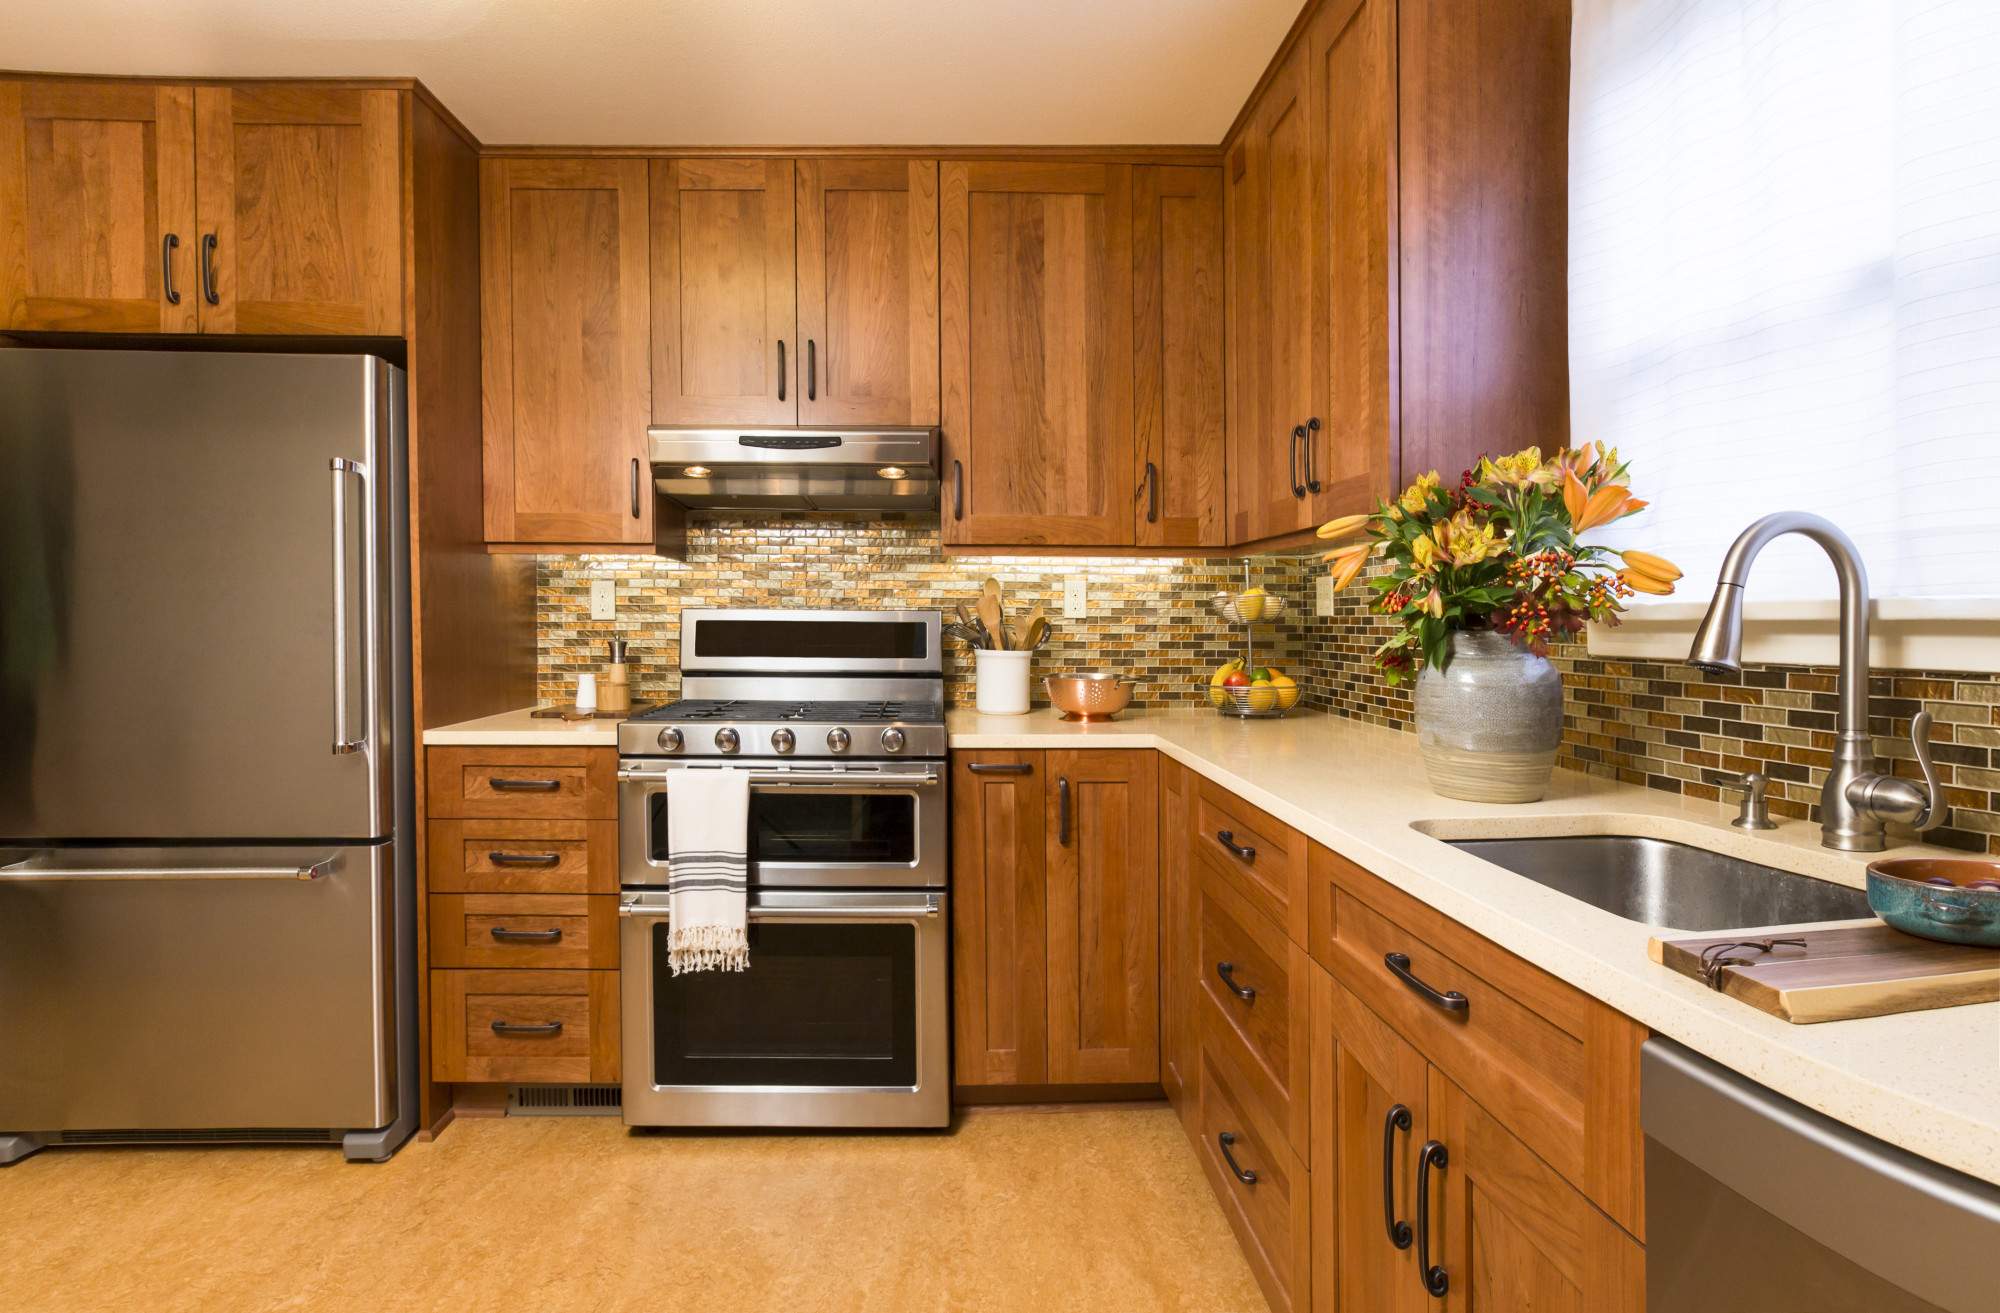 What Are the Different Types of Kitchen Layouts That Exist Today?